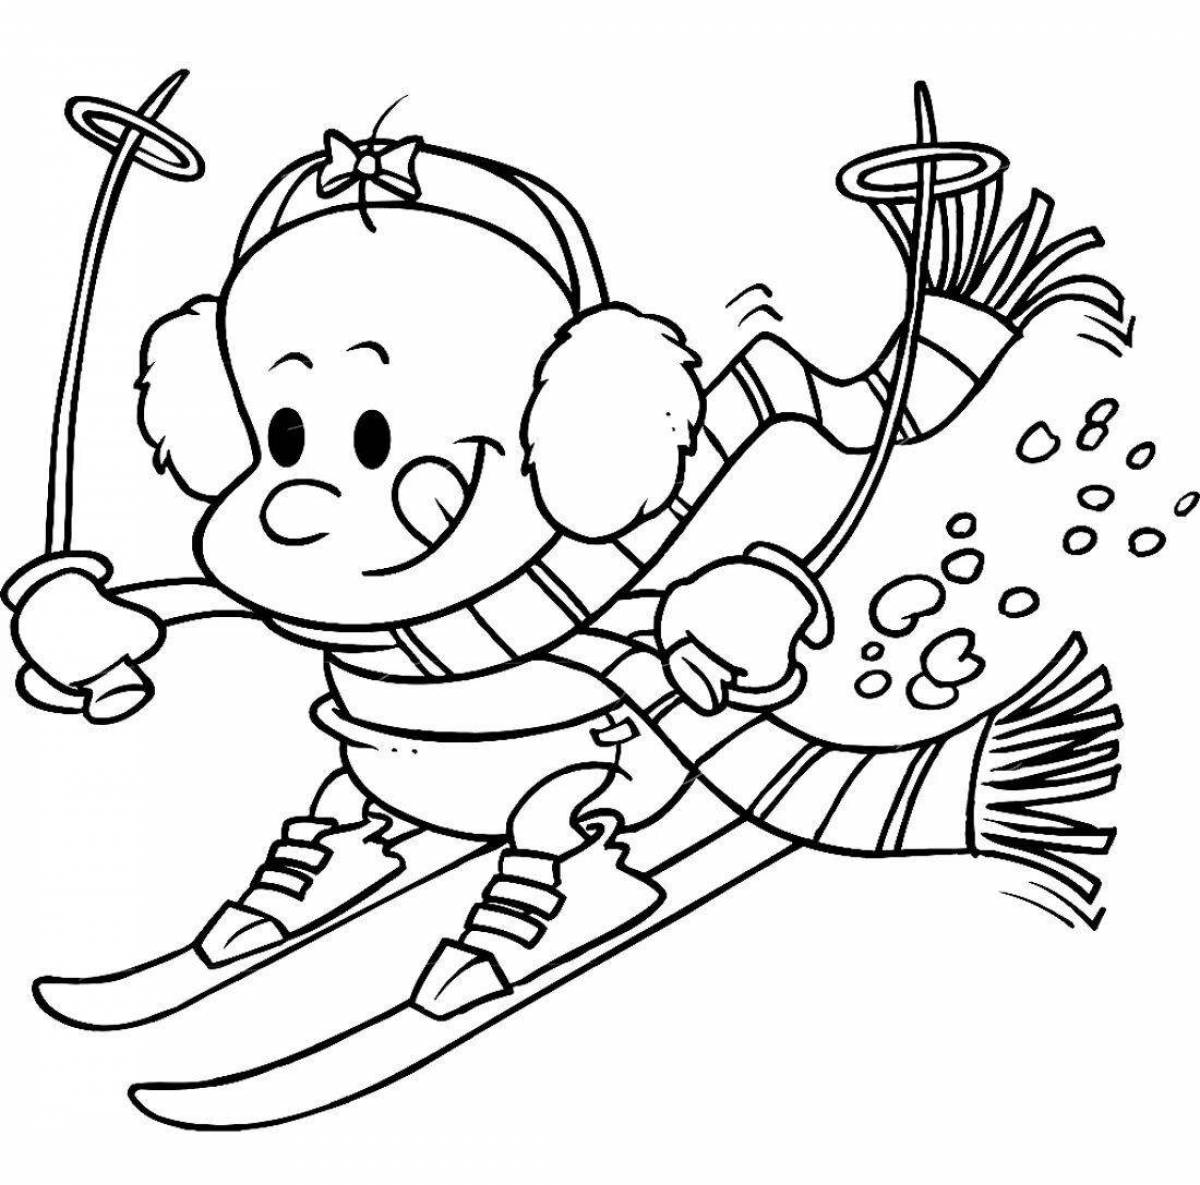 Fabulous winter sports coloring page